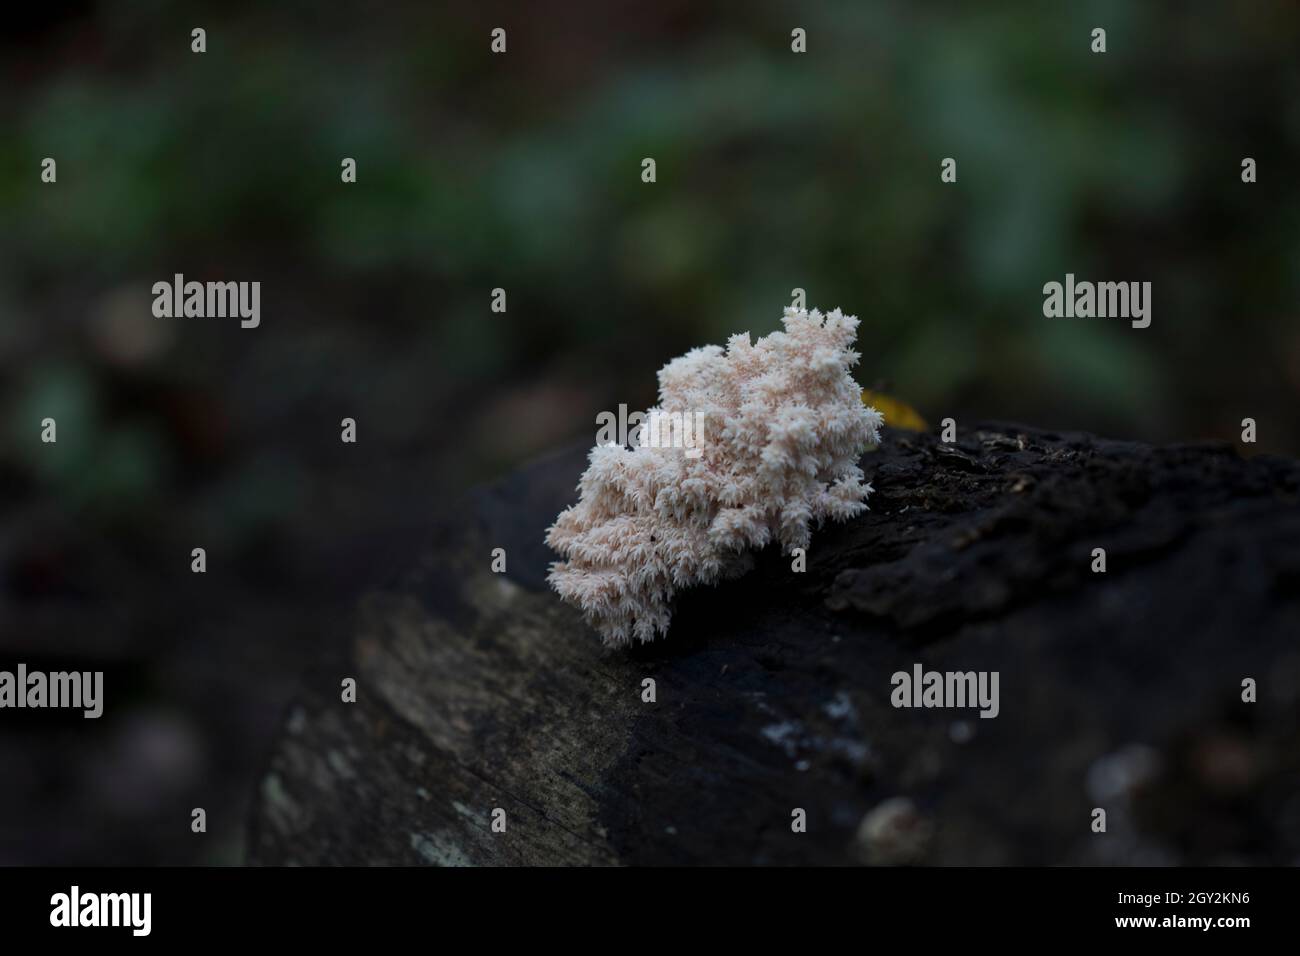 Lions mane mushroom hericium coralloides growing in the forest. Stock Photo